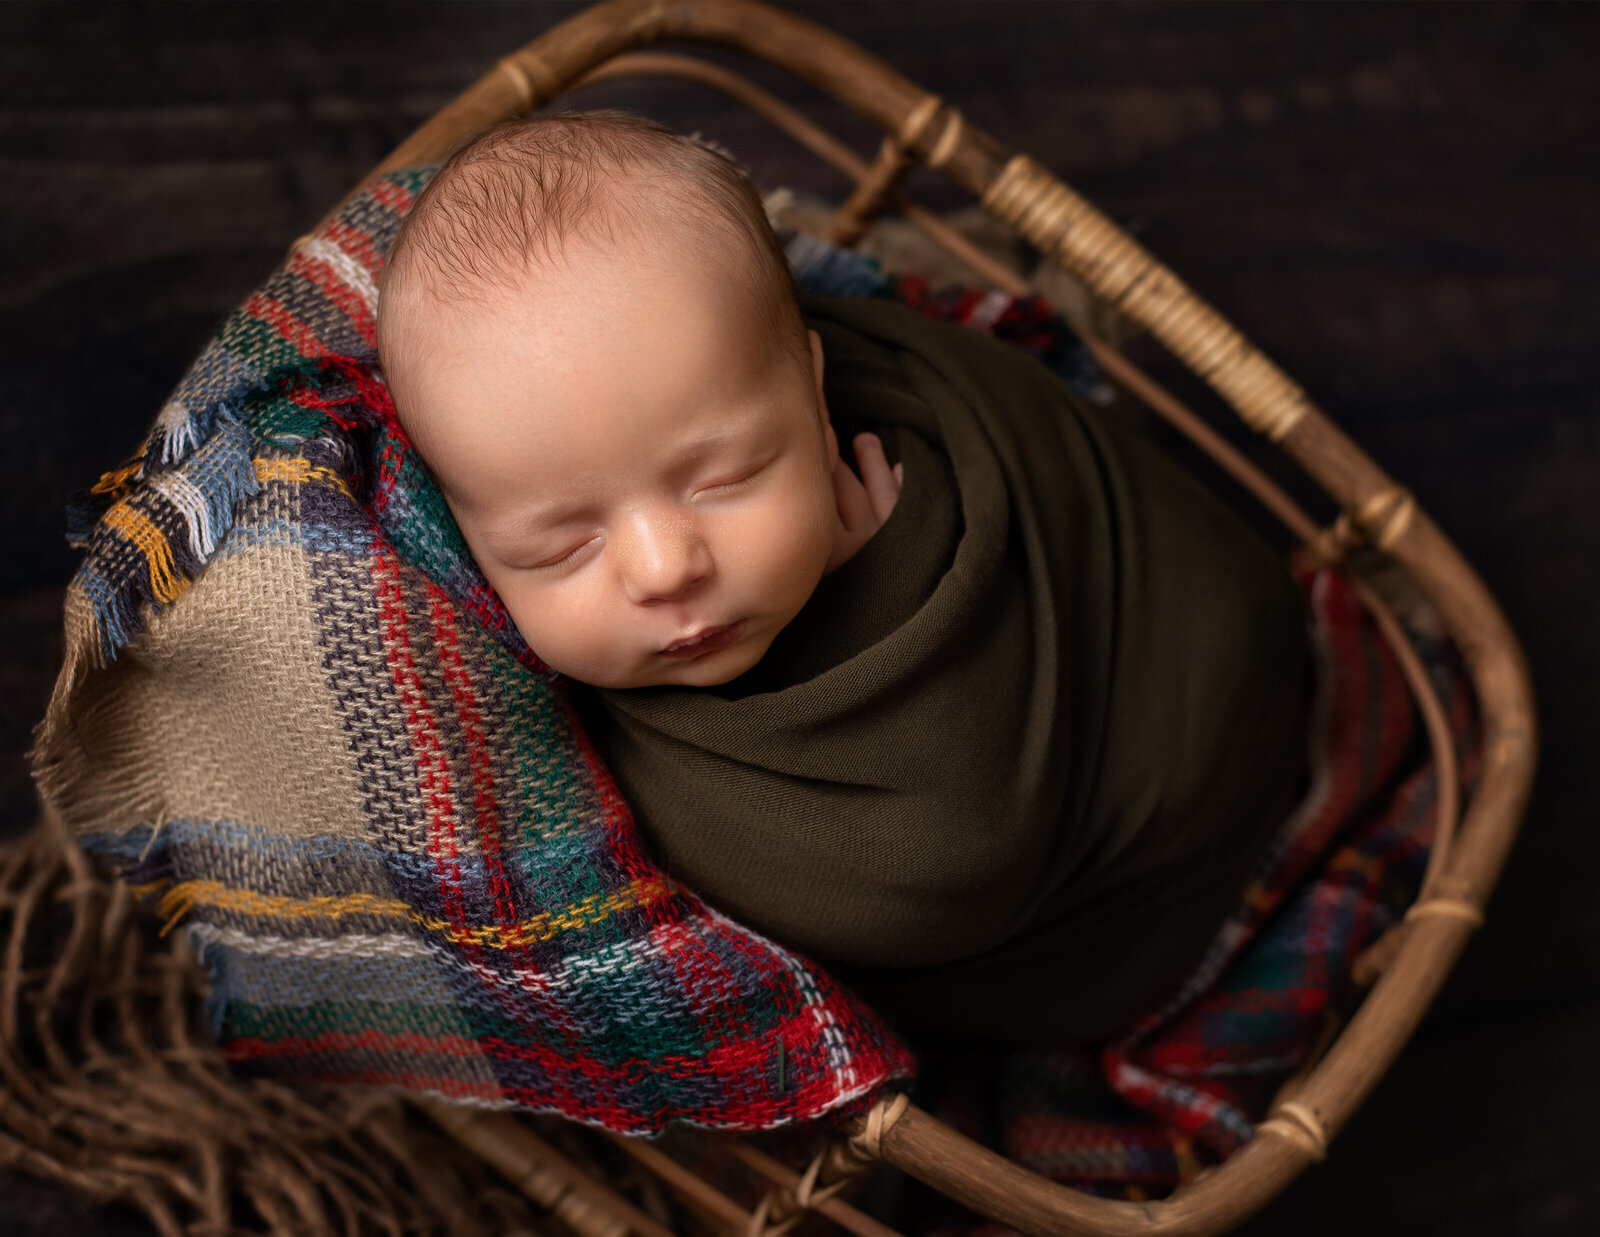 baby photo in basket and plaid